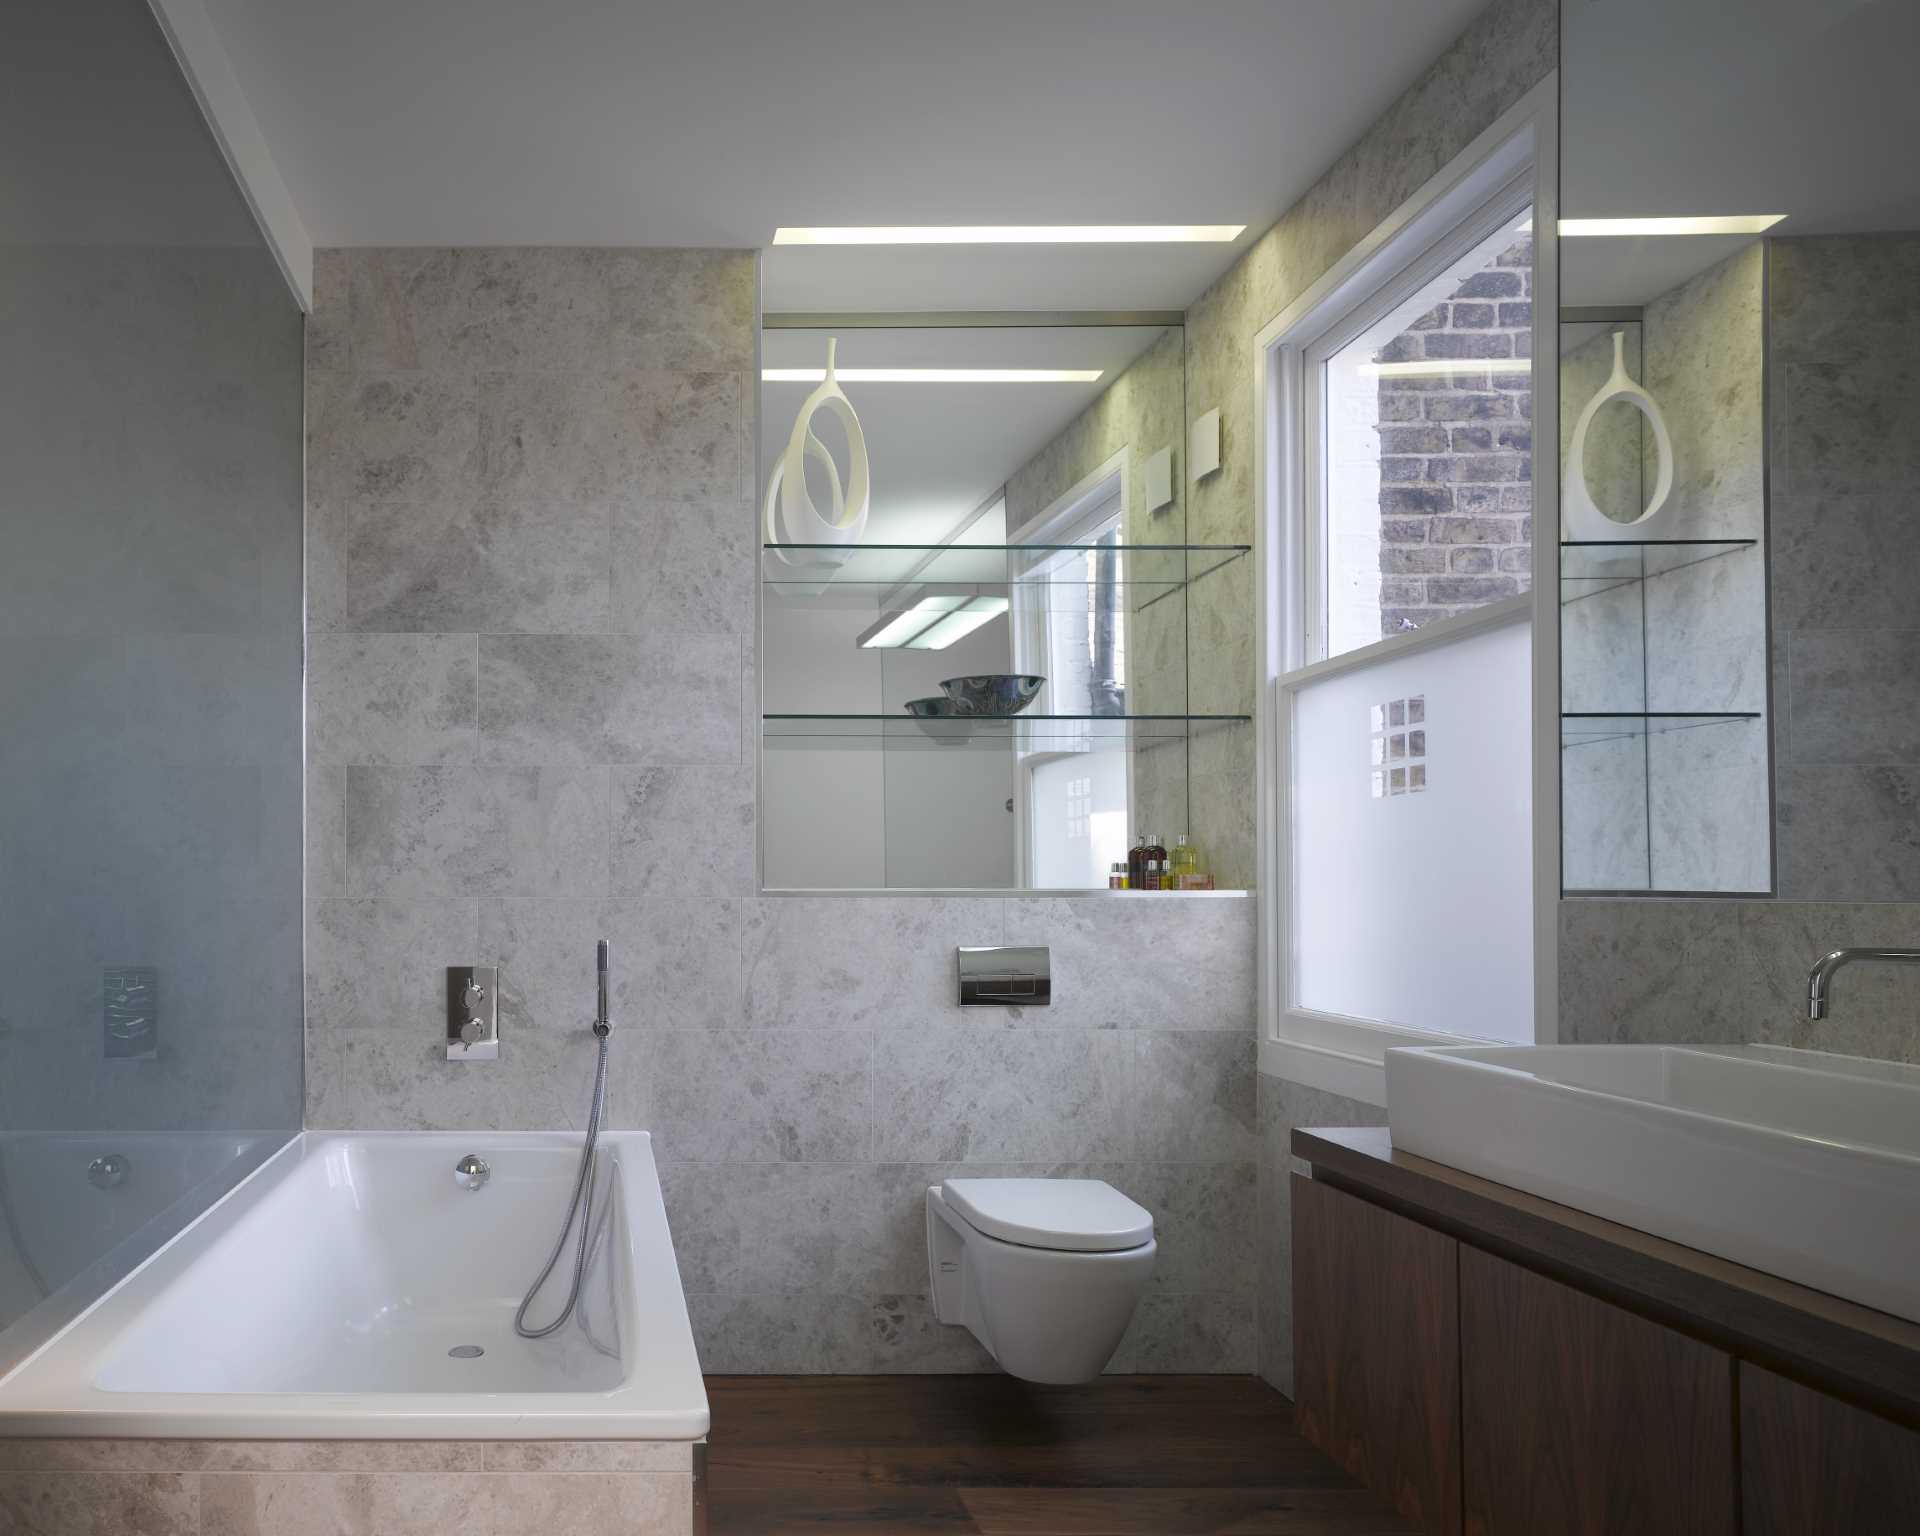 In this bathroom, the walls and floors are covered with tile, while the mirrors reflect the light around the interior.